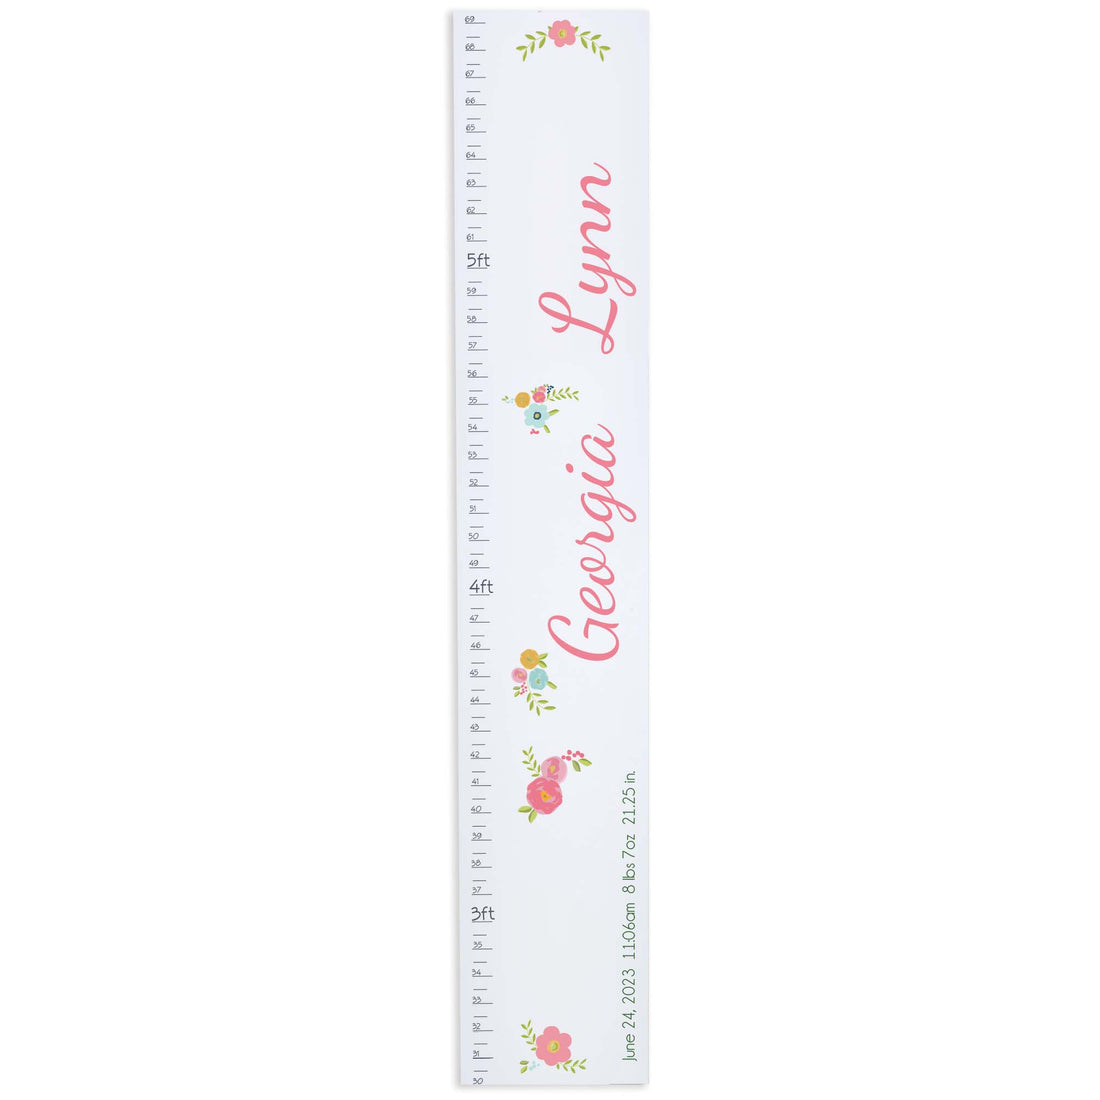 Spring Floral Growth Chart with birth information